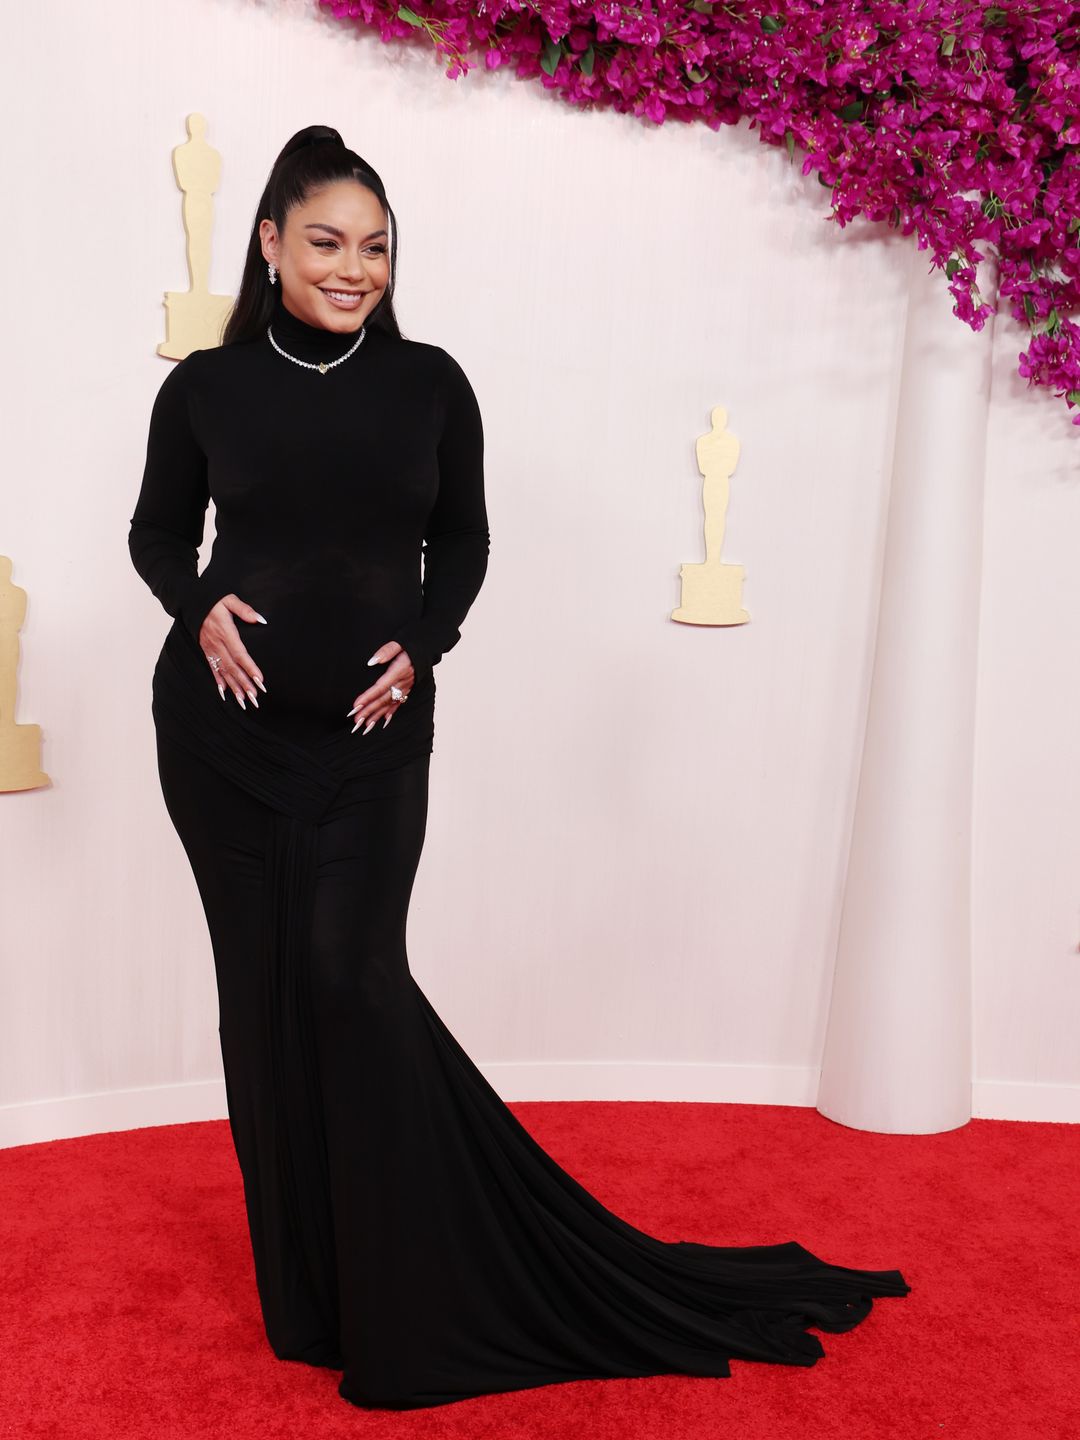 Vanessa Hudgens attends the 96th Annual Academy Awards in a black gown